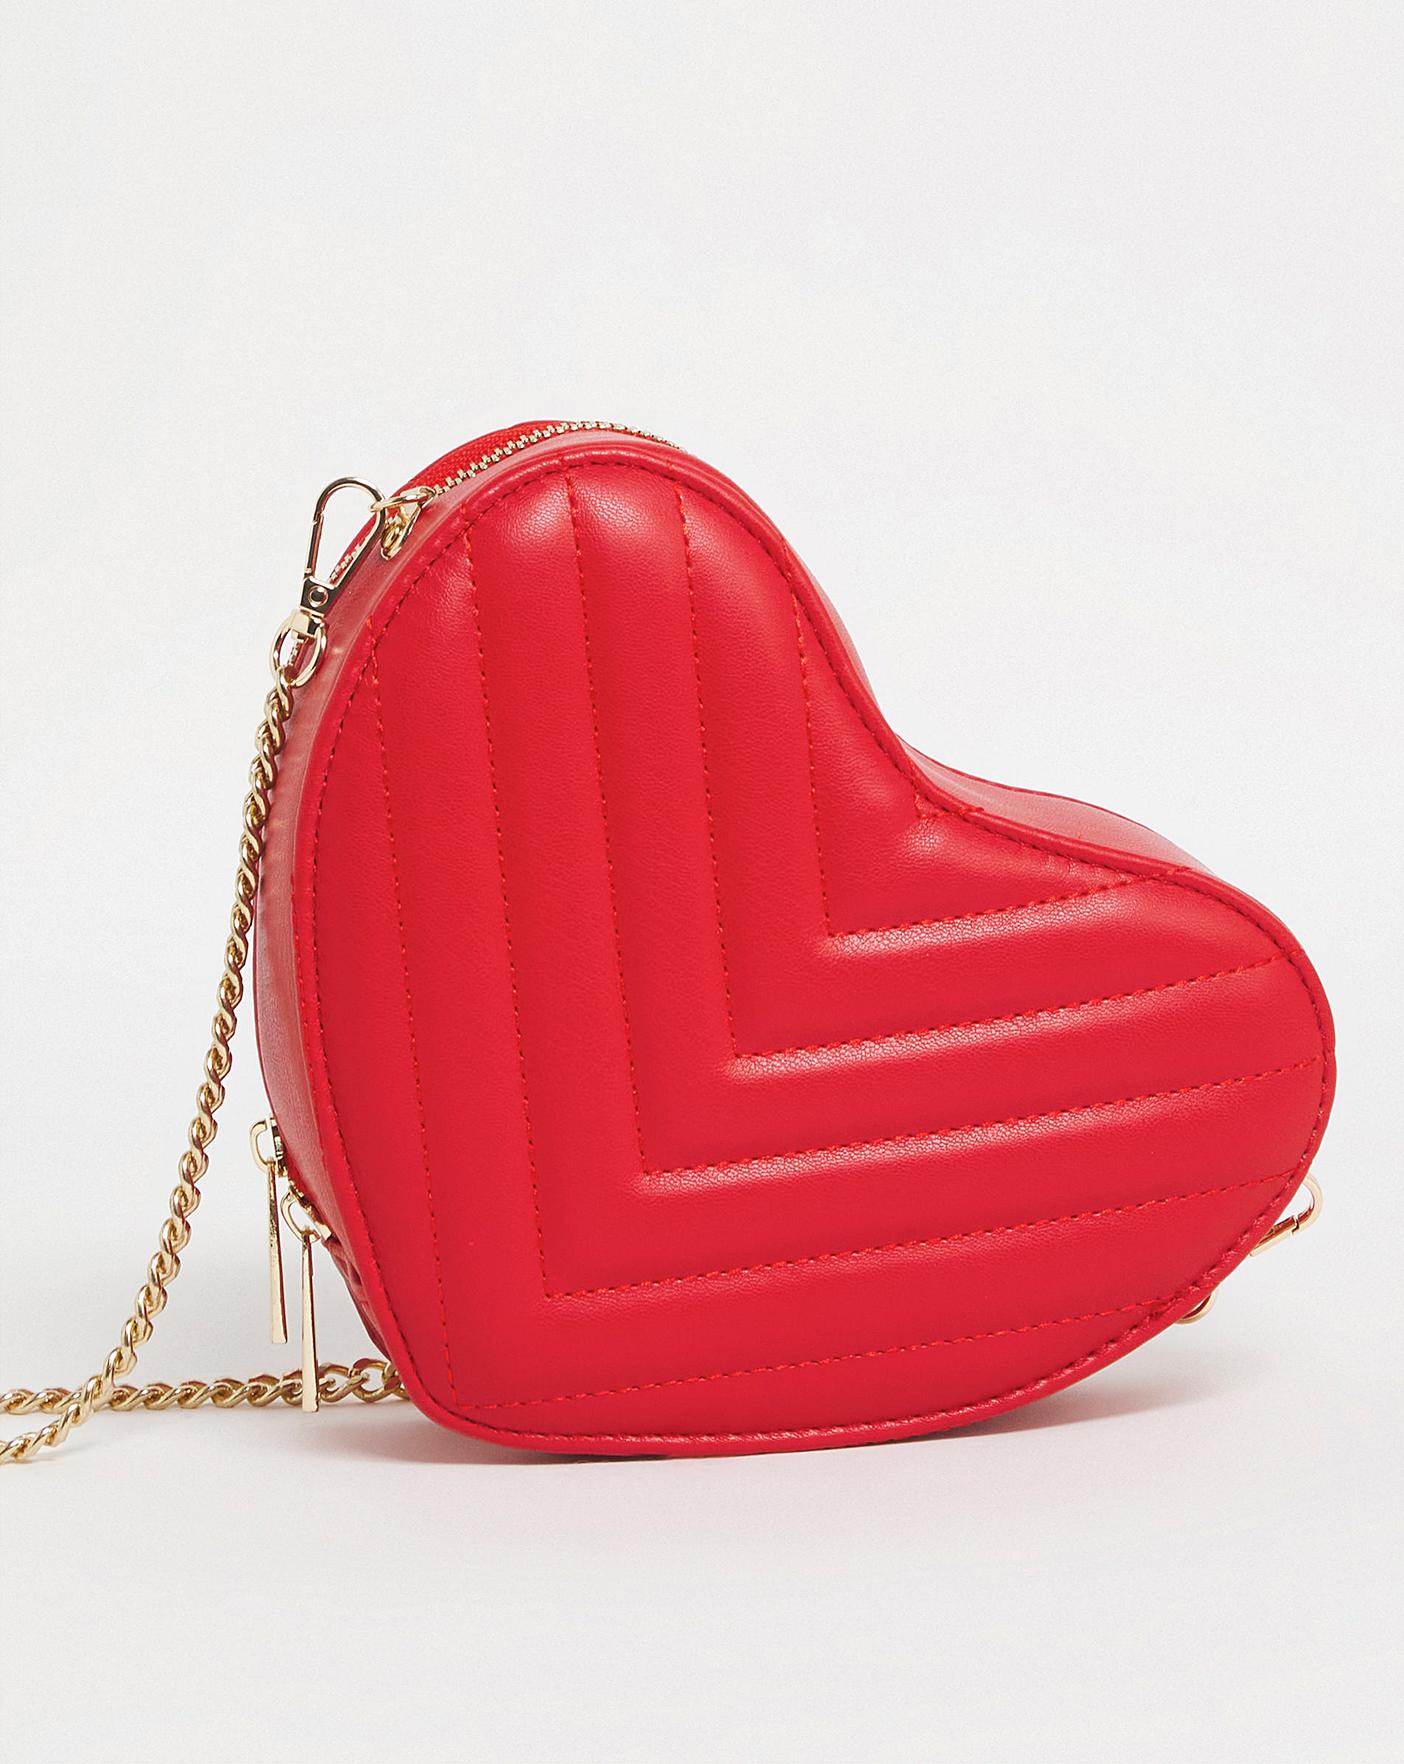 Red Heart Bag